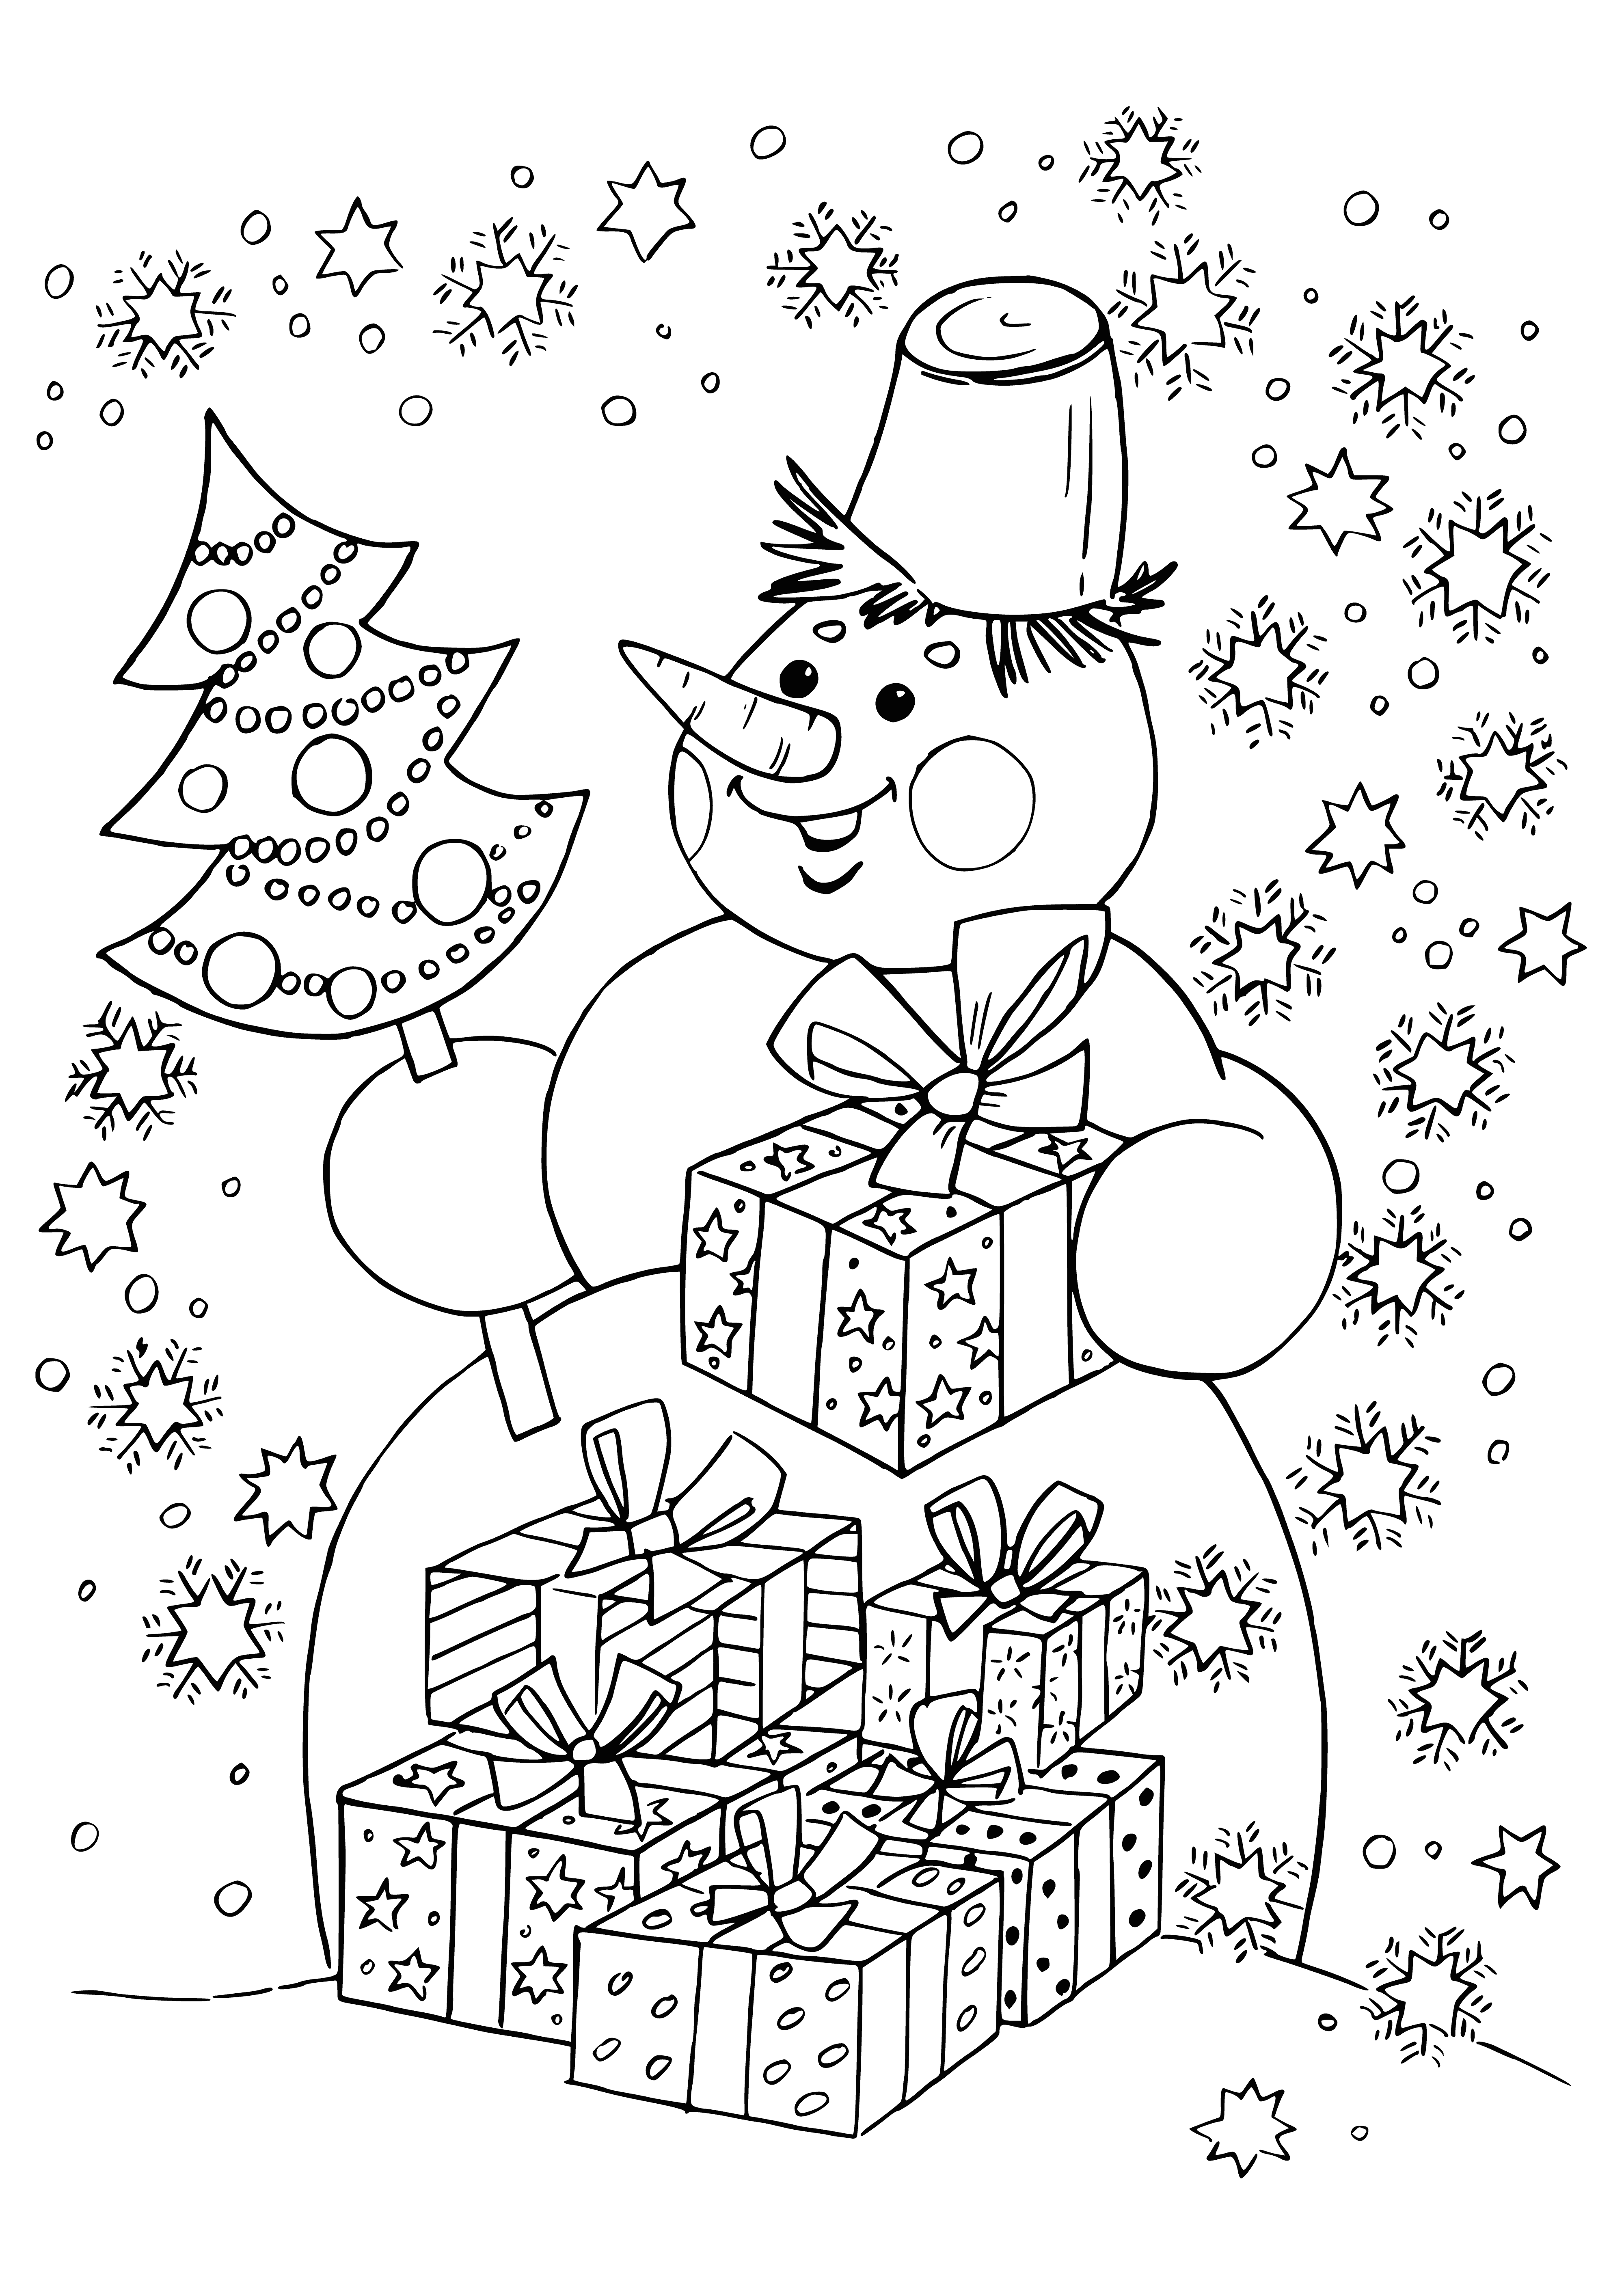 A snowman with a carrot nose and gifts of a large red ball, green wrapped present, and polka dot bag decorates the center of this coloring page.